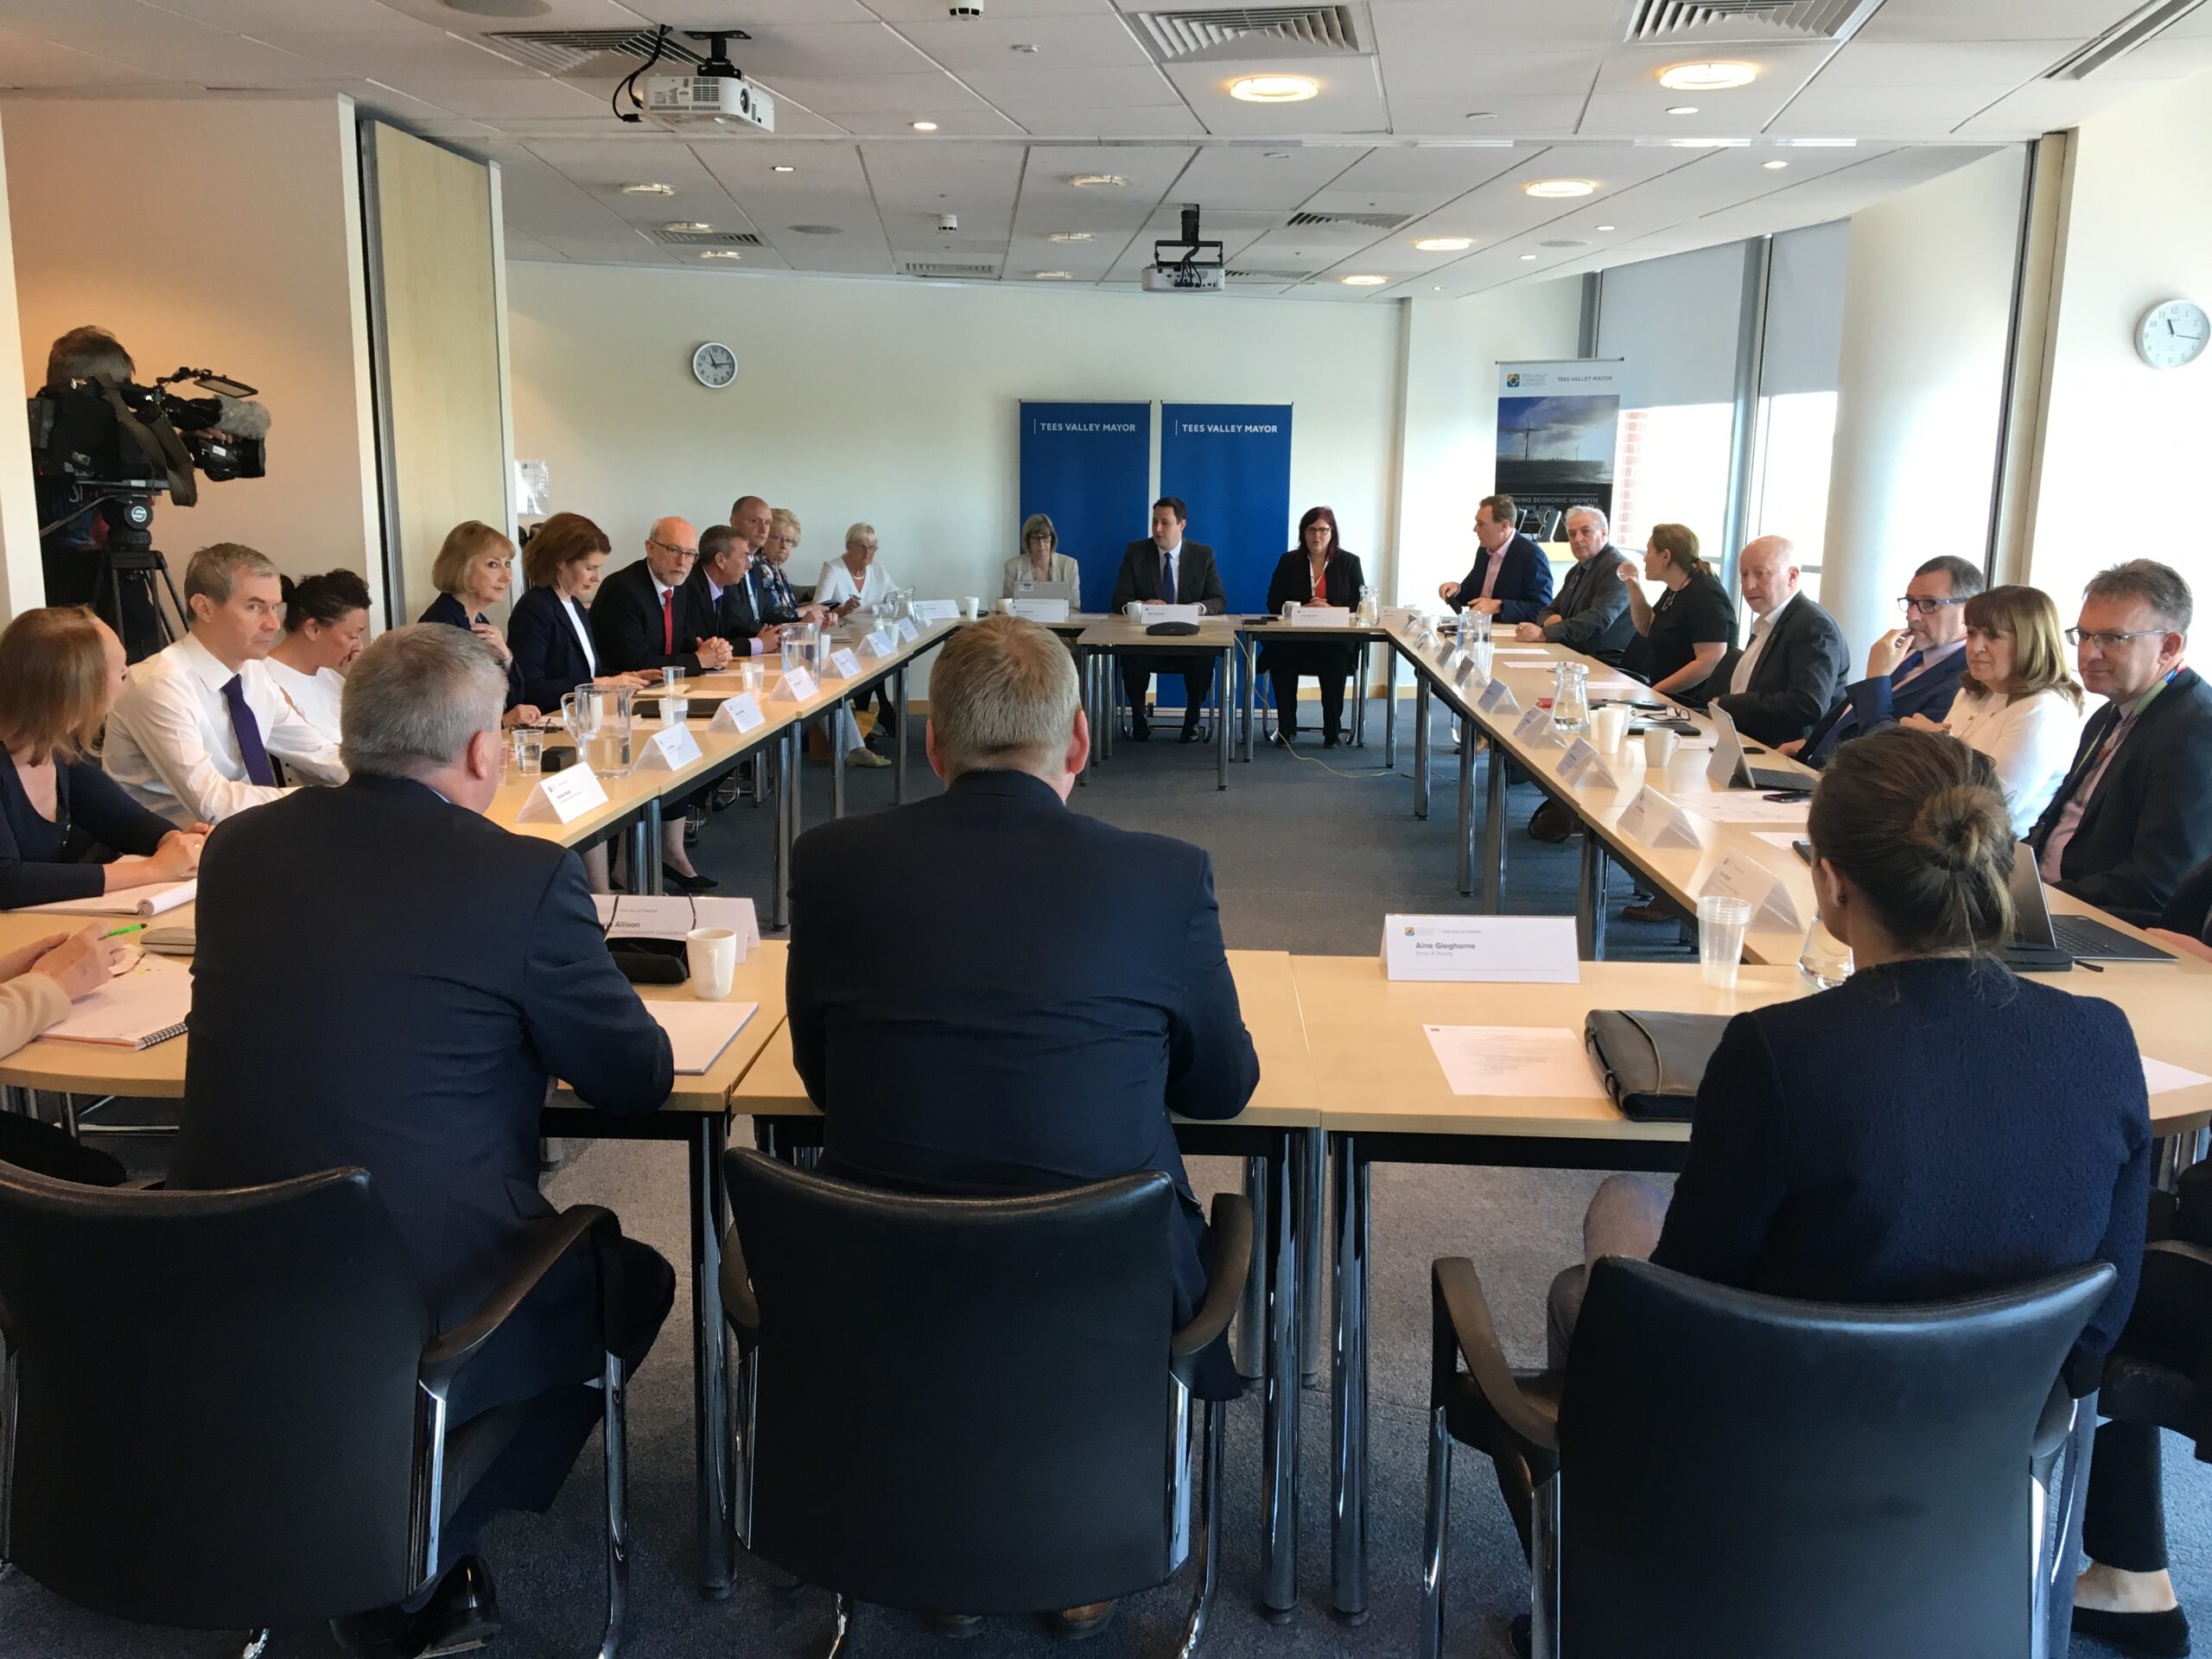 Mayor and Leaders | Tees Valley Combined Authority